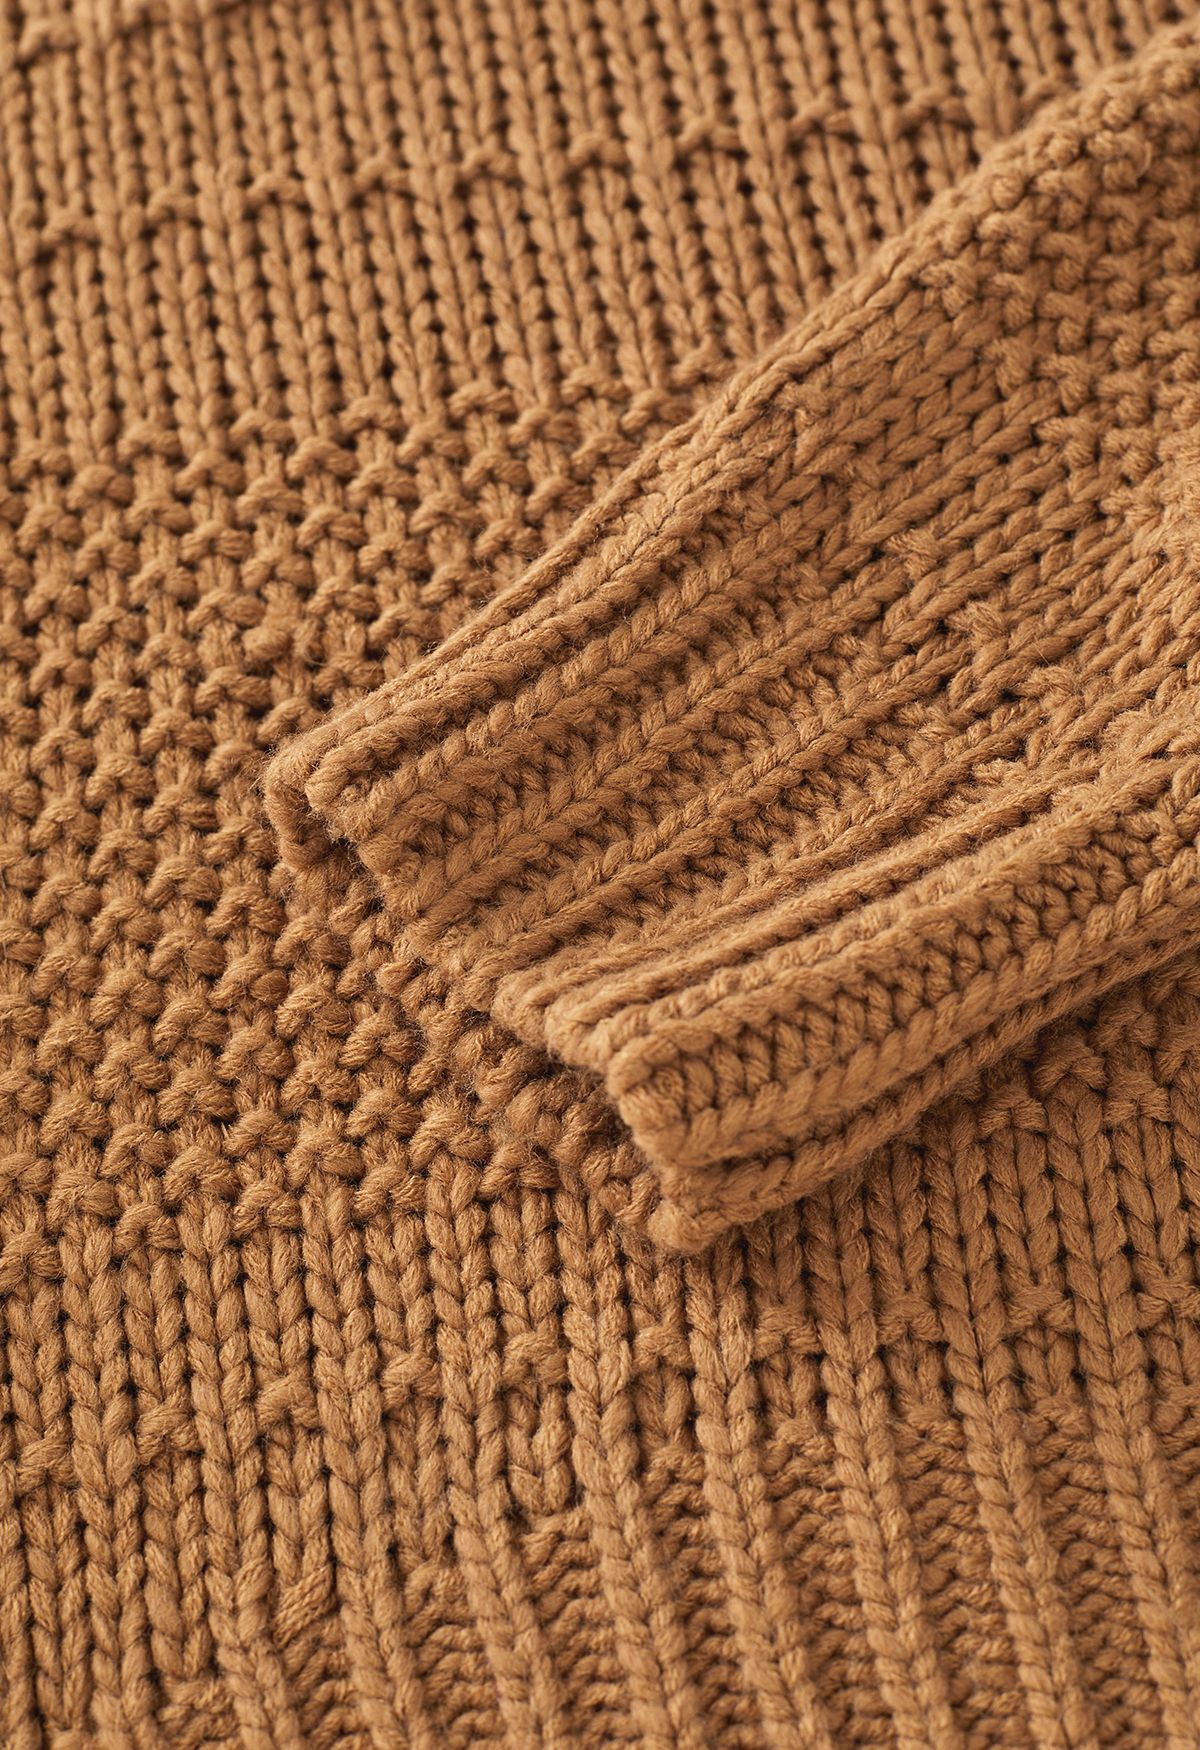 Mock Neck Hi-Lo Chunky Knit Sweater in Caramel - Retro, Indie and